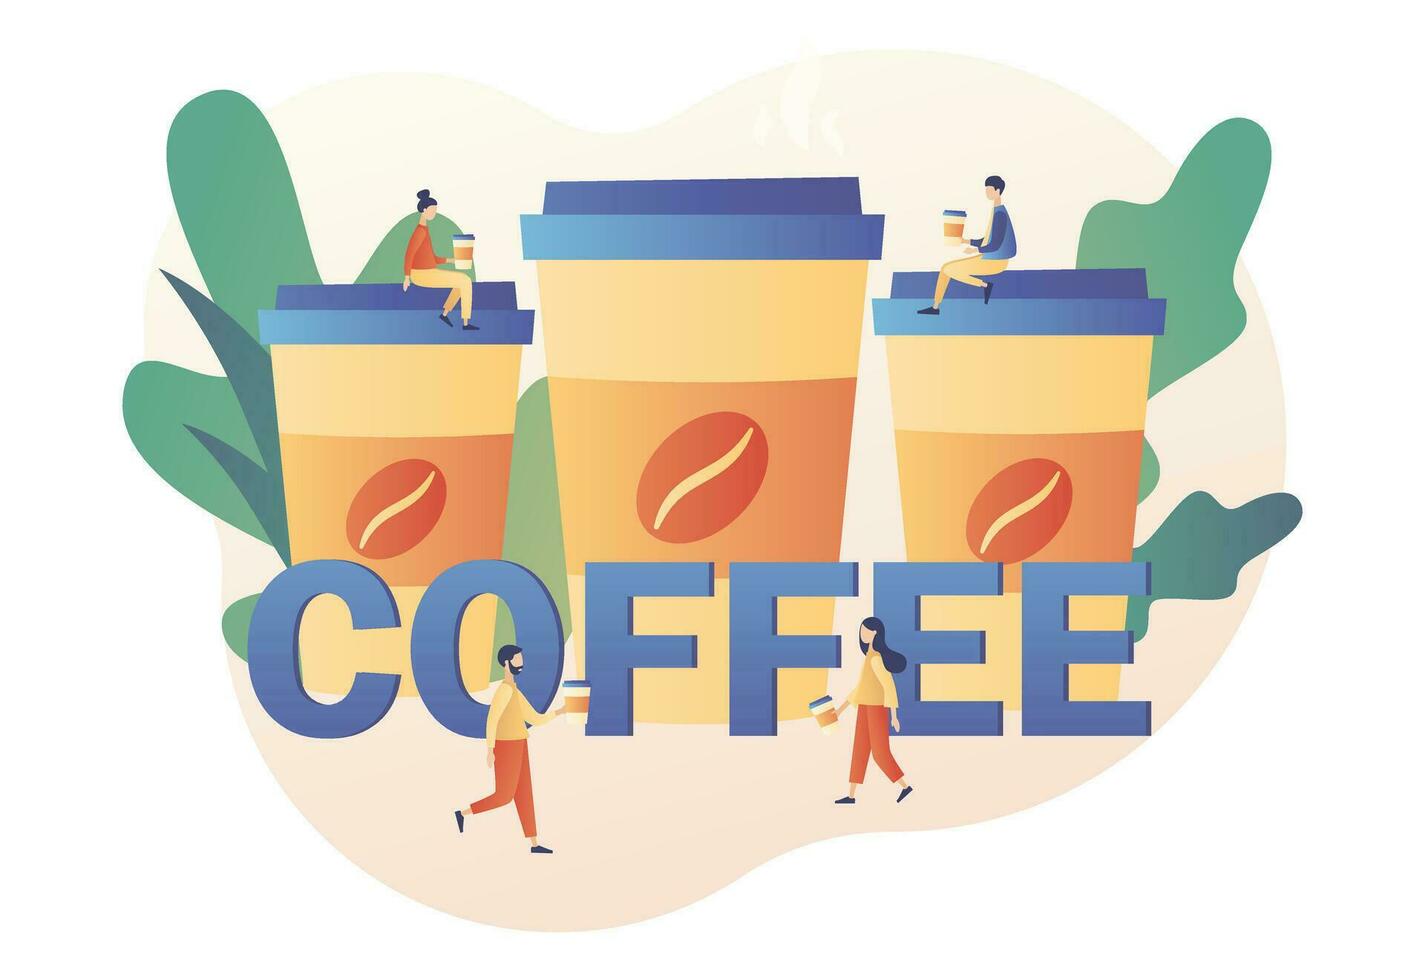 Tiny people businessmen relaxing, talking and drinking coffee. Coffee -text and big cups. Coffee break concept. Lunch time in office. Modern flat cartoon style. Vector illustration on white background